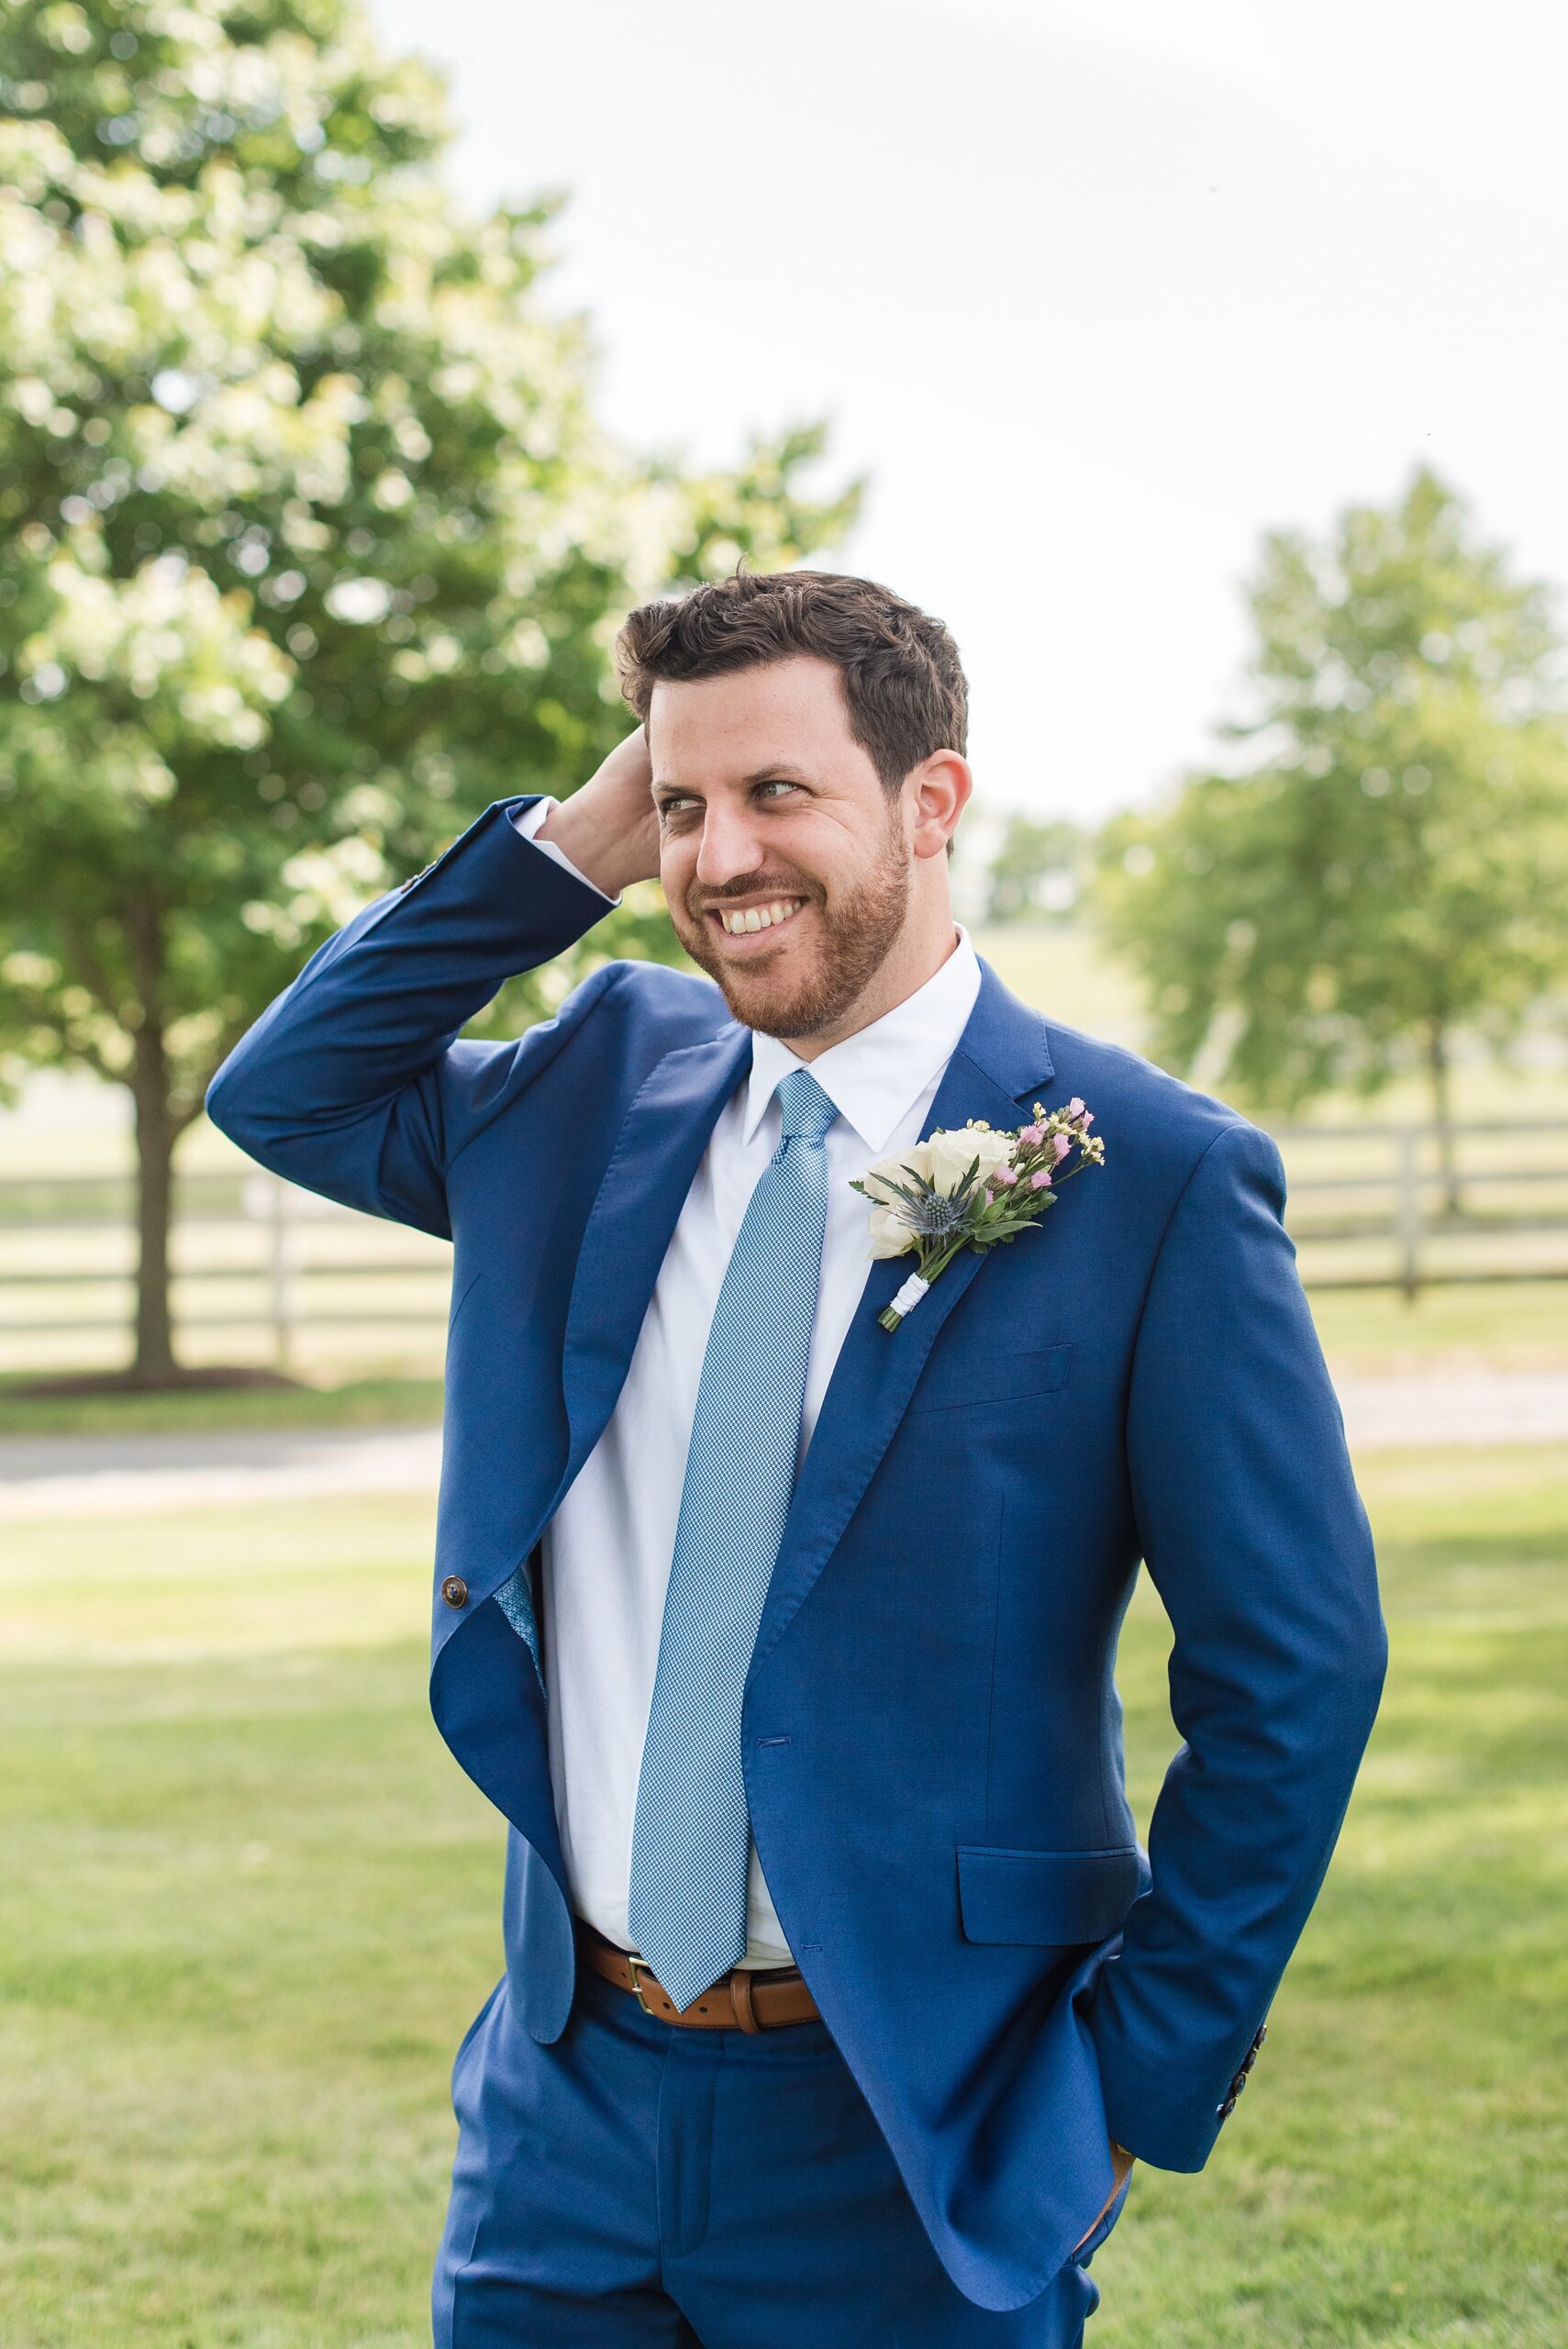 A groom in a blue suit runs a hand through his hair while standing in a lawn